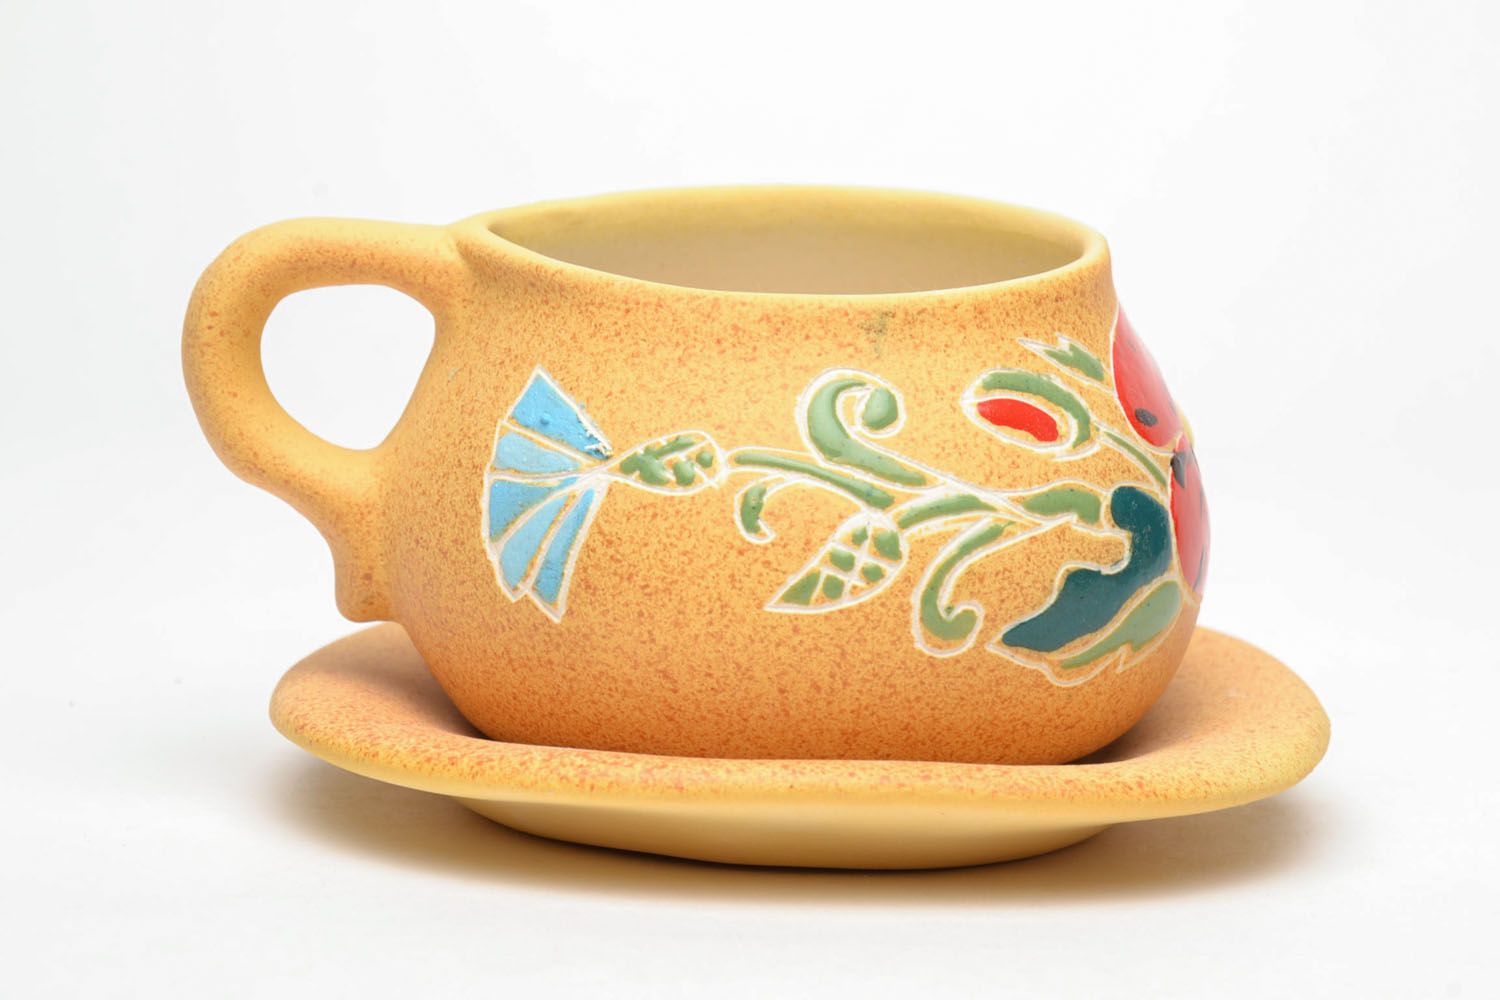 Pot shape clay 5 oz cup for coffee or tea with saucer and handle. Floral red poppies pattern. photo 3